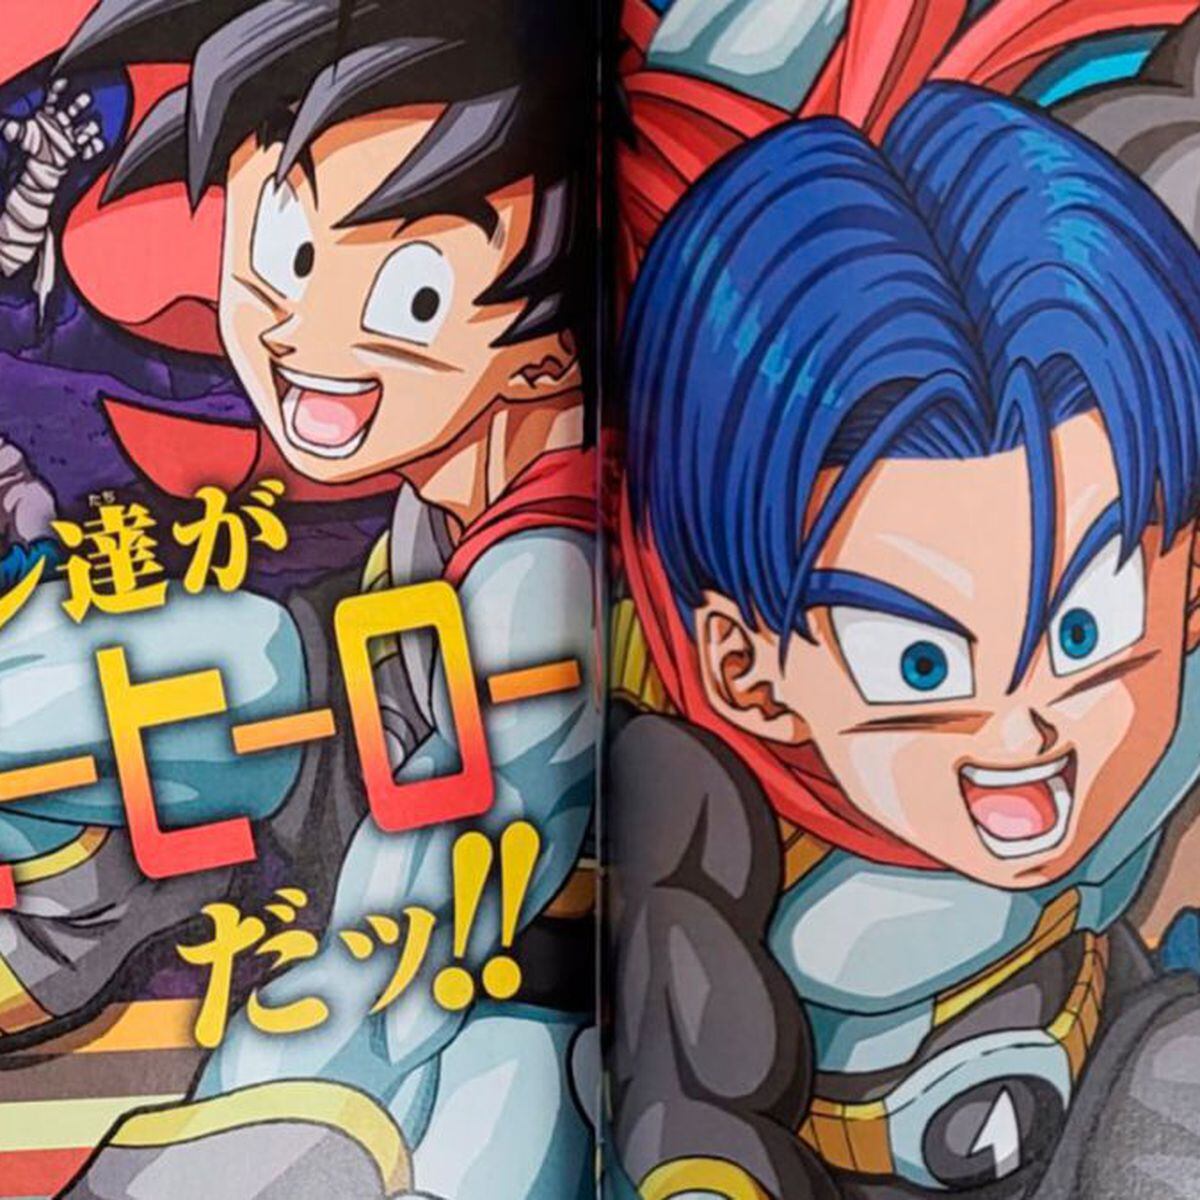 How strong are Goten and Trunks in the new Dragon Ball Super arc